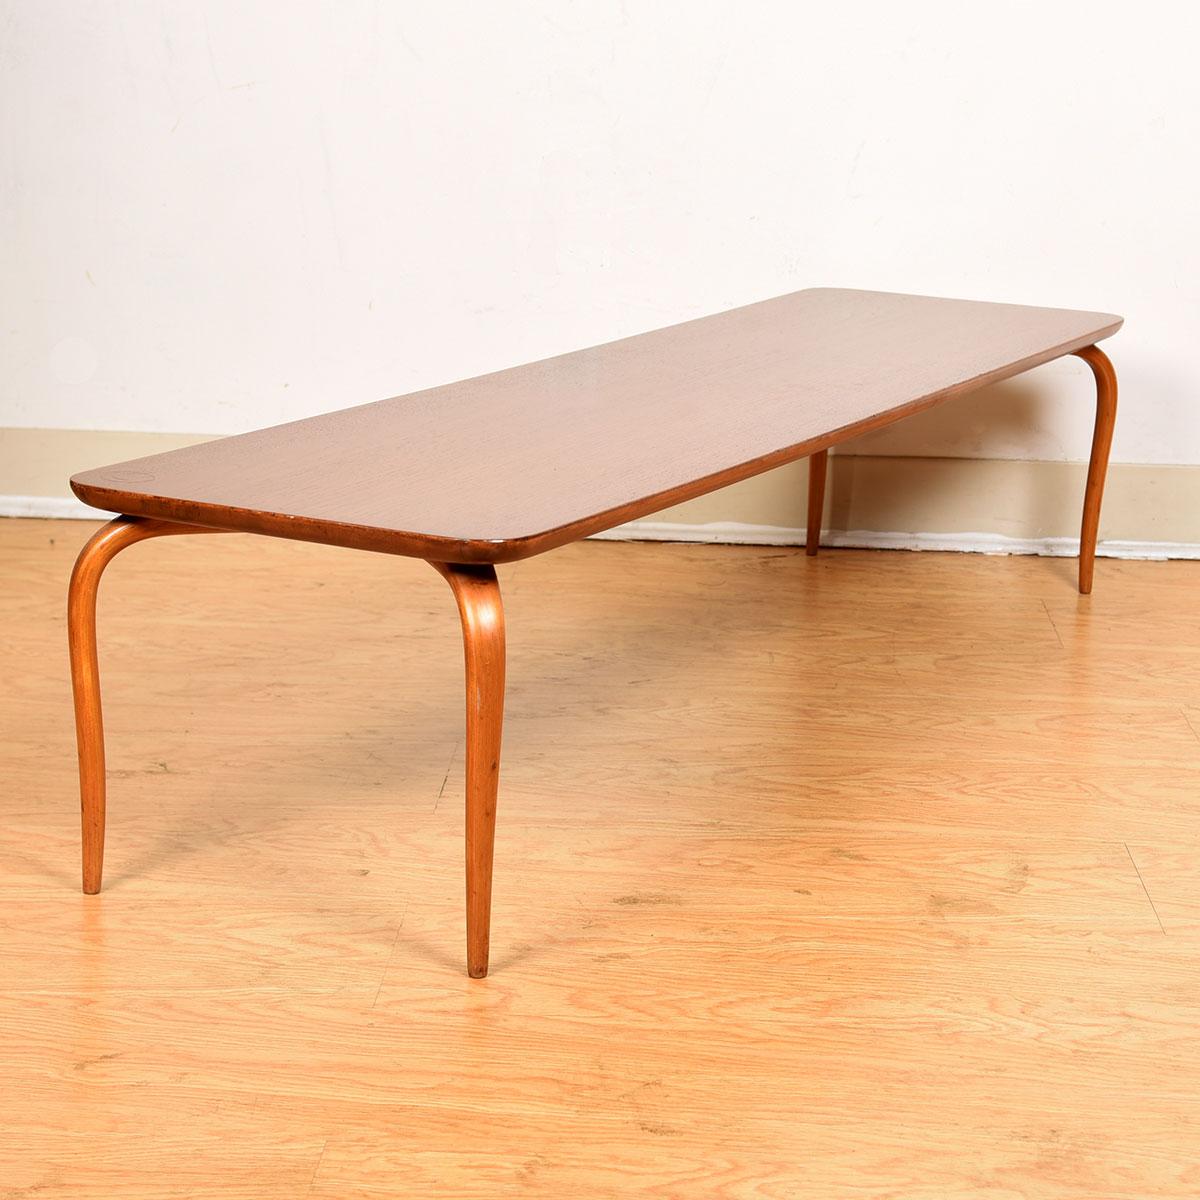 ‘Long Table’ Swedish Modern Organic-Leg Coffee Table by Bruno Mathsson, 1950s In Excellent Condition For Sale In Kensington, MD